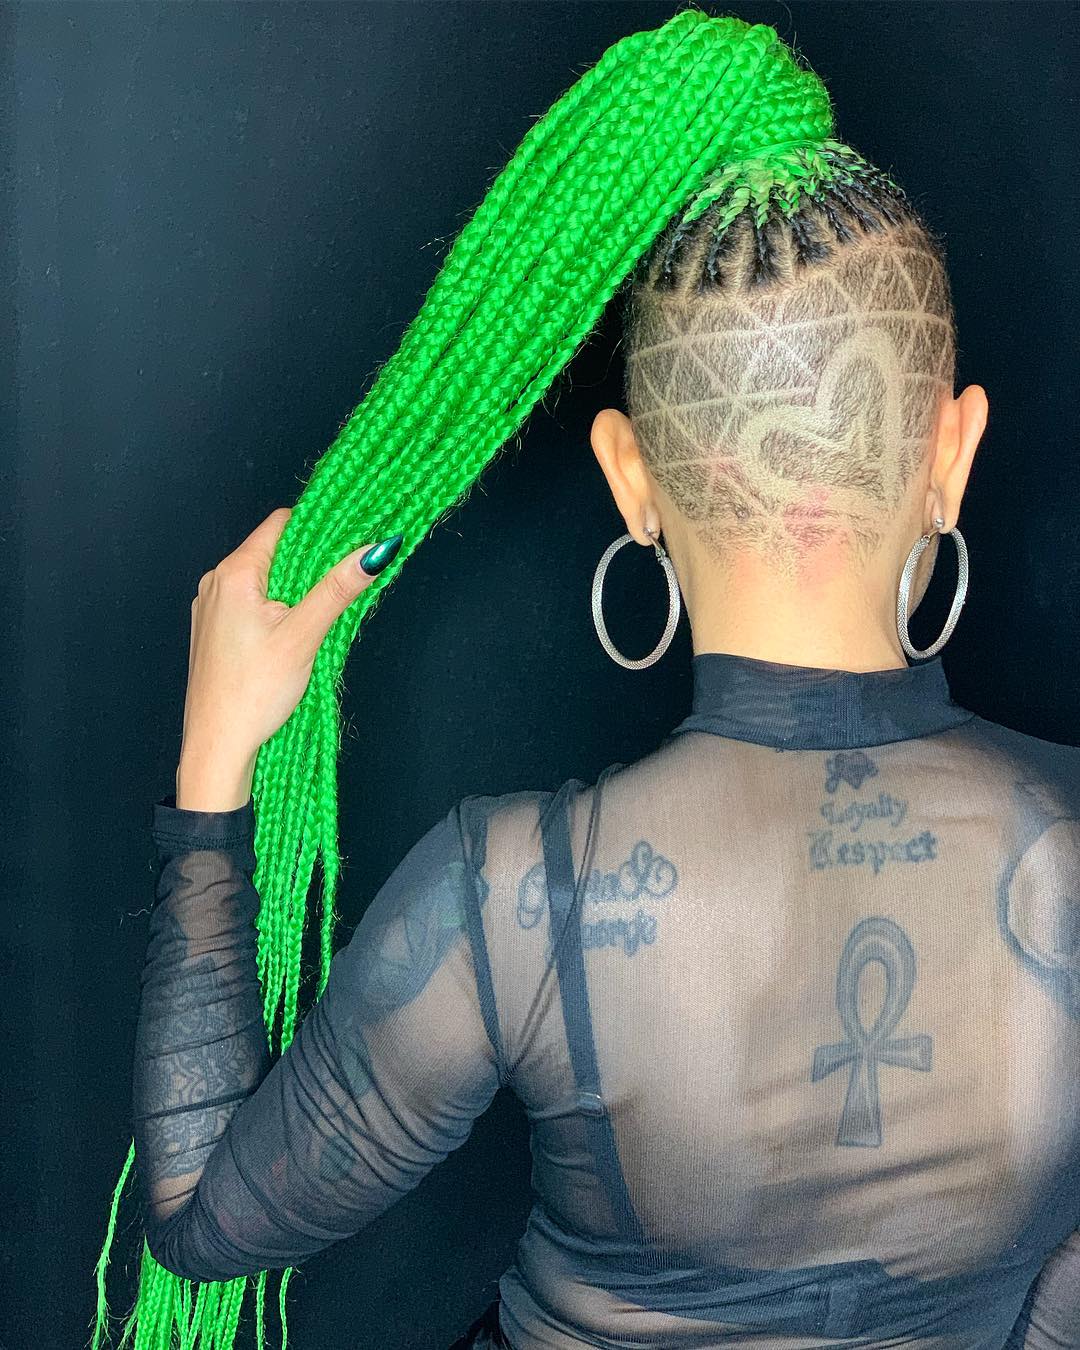 Image of Green Braids With Fade in the style of green braids